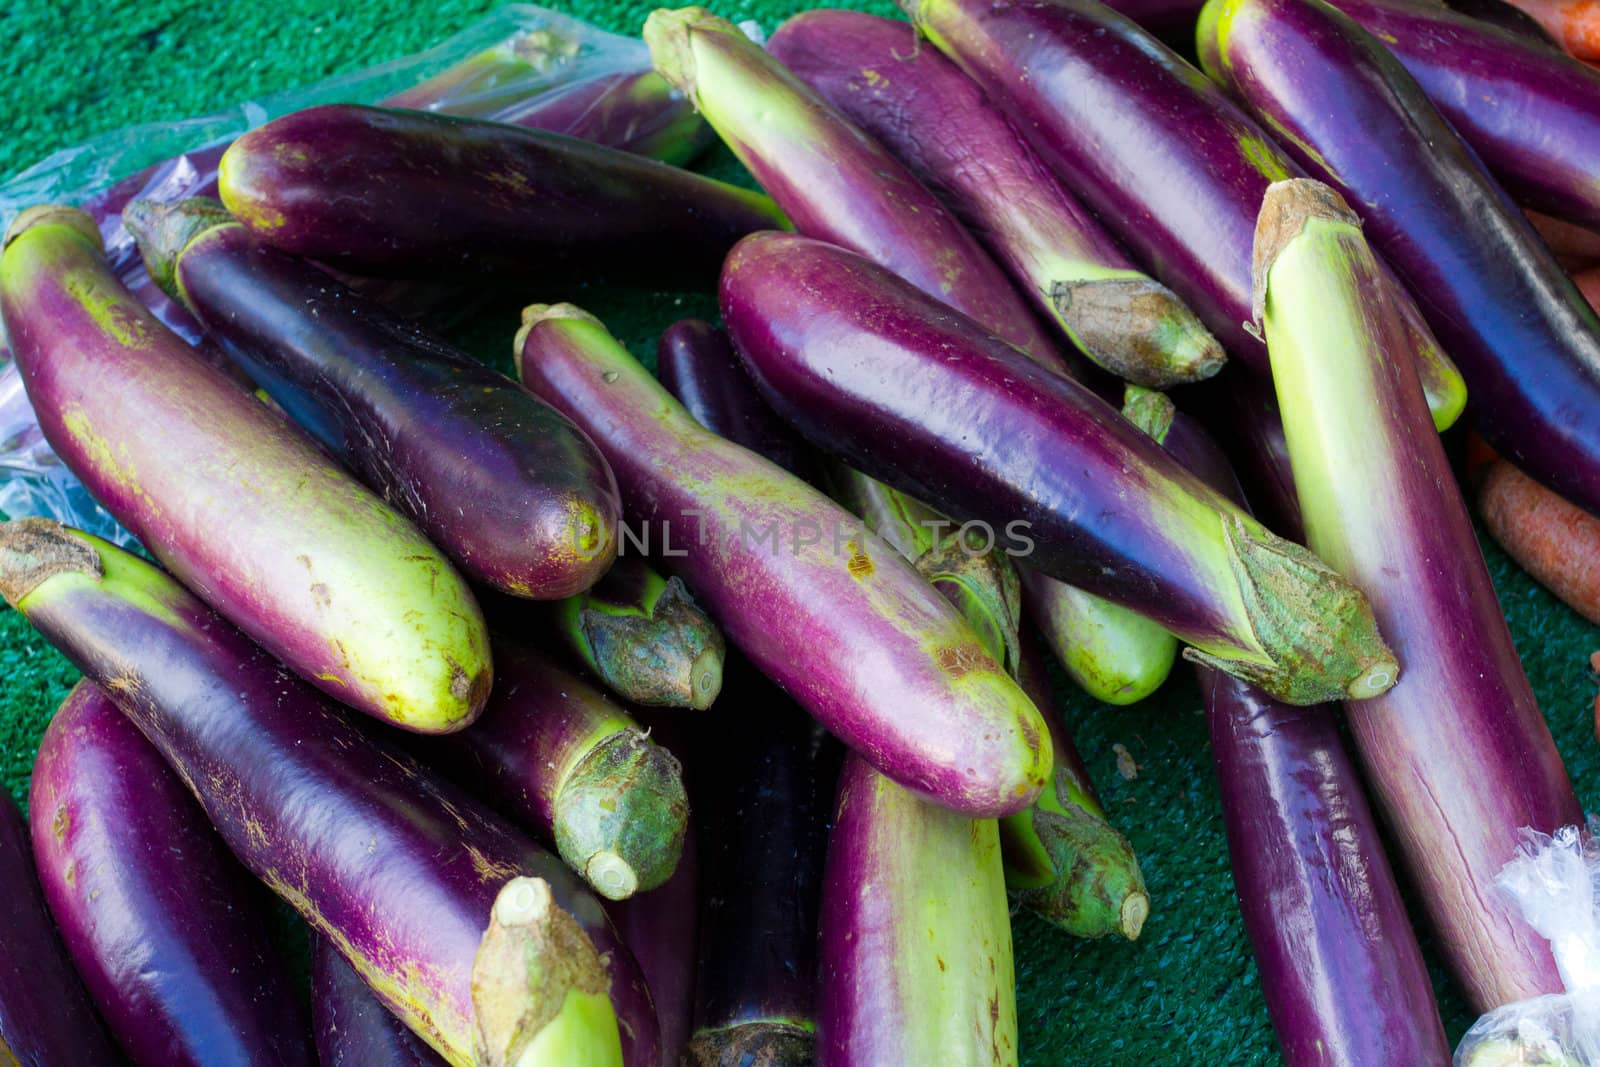 Images from a farmers market in Hawaii showing tropical fruits or vegetables in simple photos with vibrant colors.